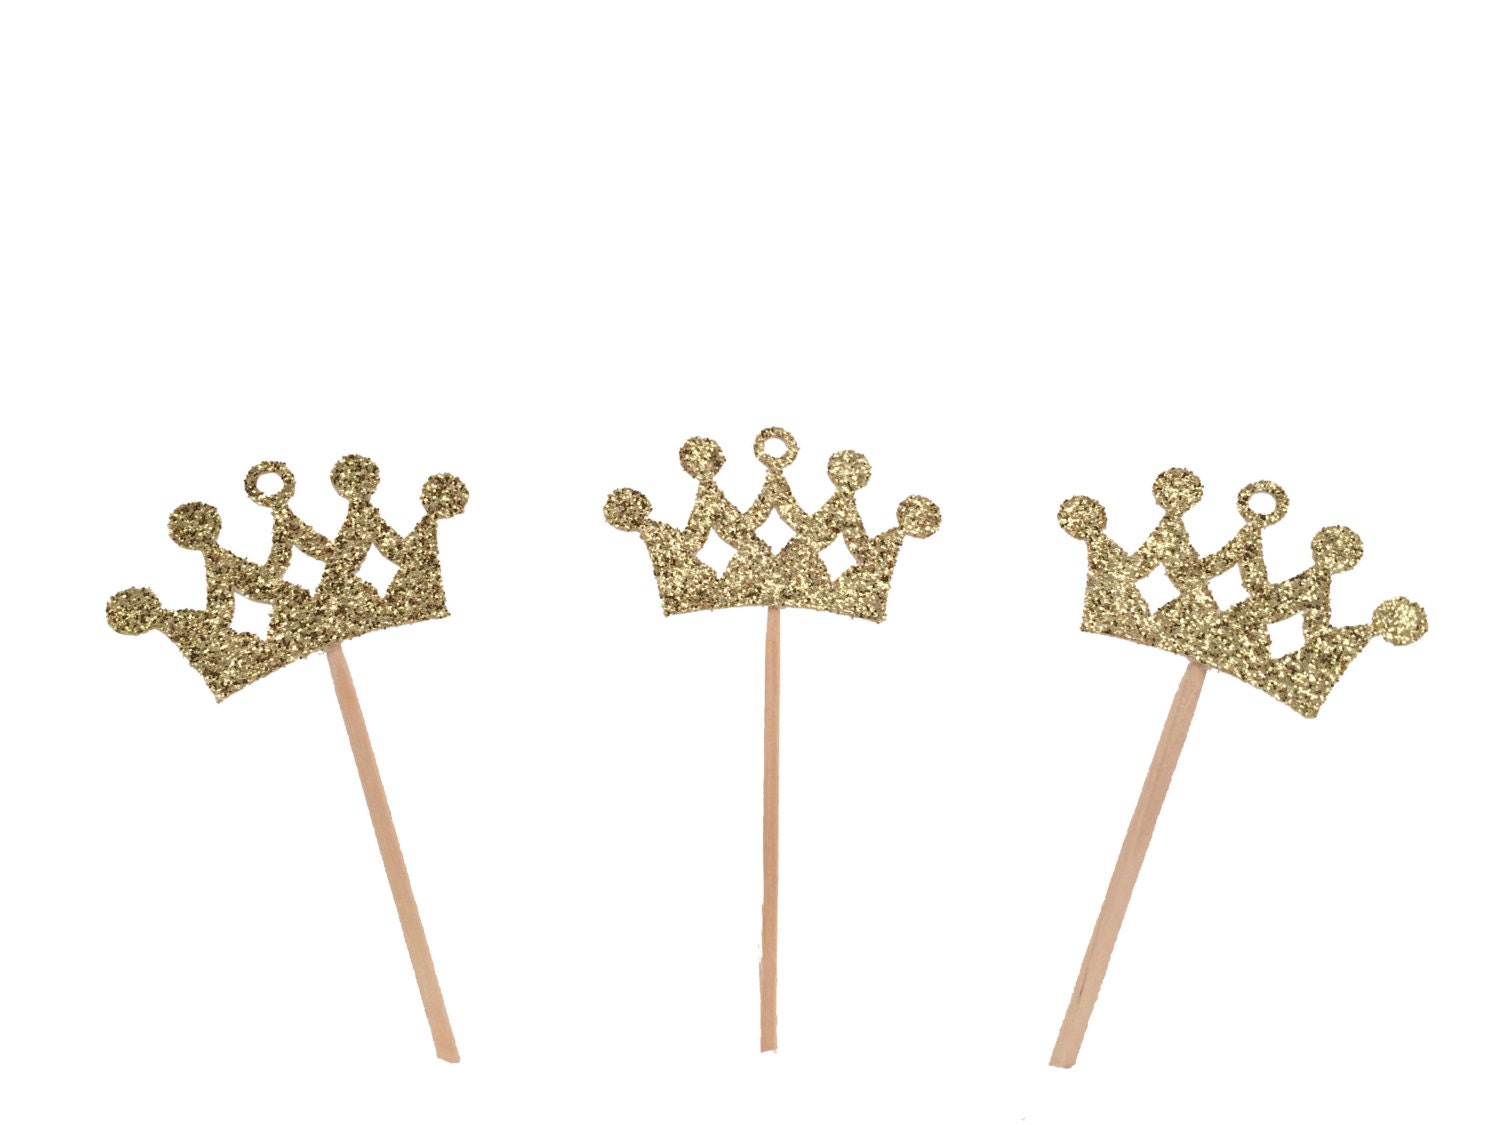 Gold Princess Crown Cupcake Toppers Set of 12 by TopMyCupcakes